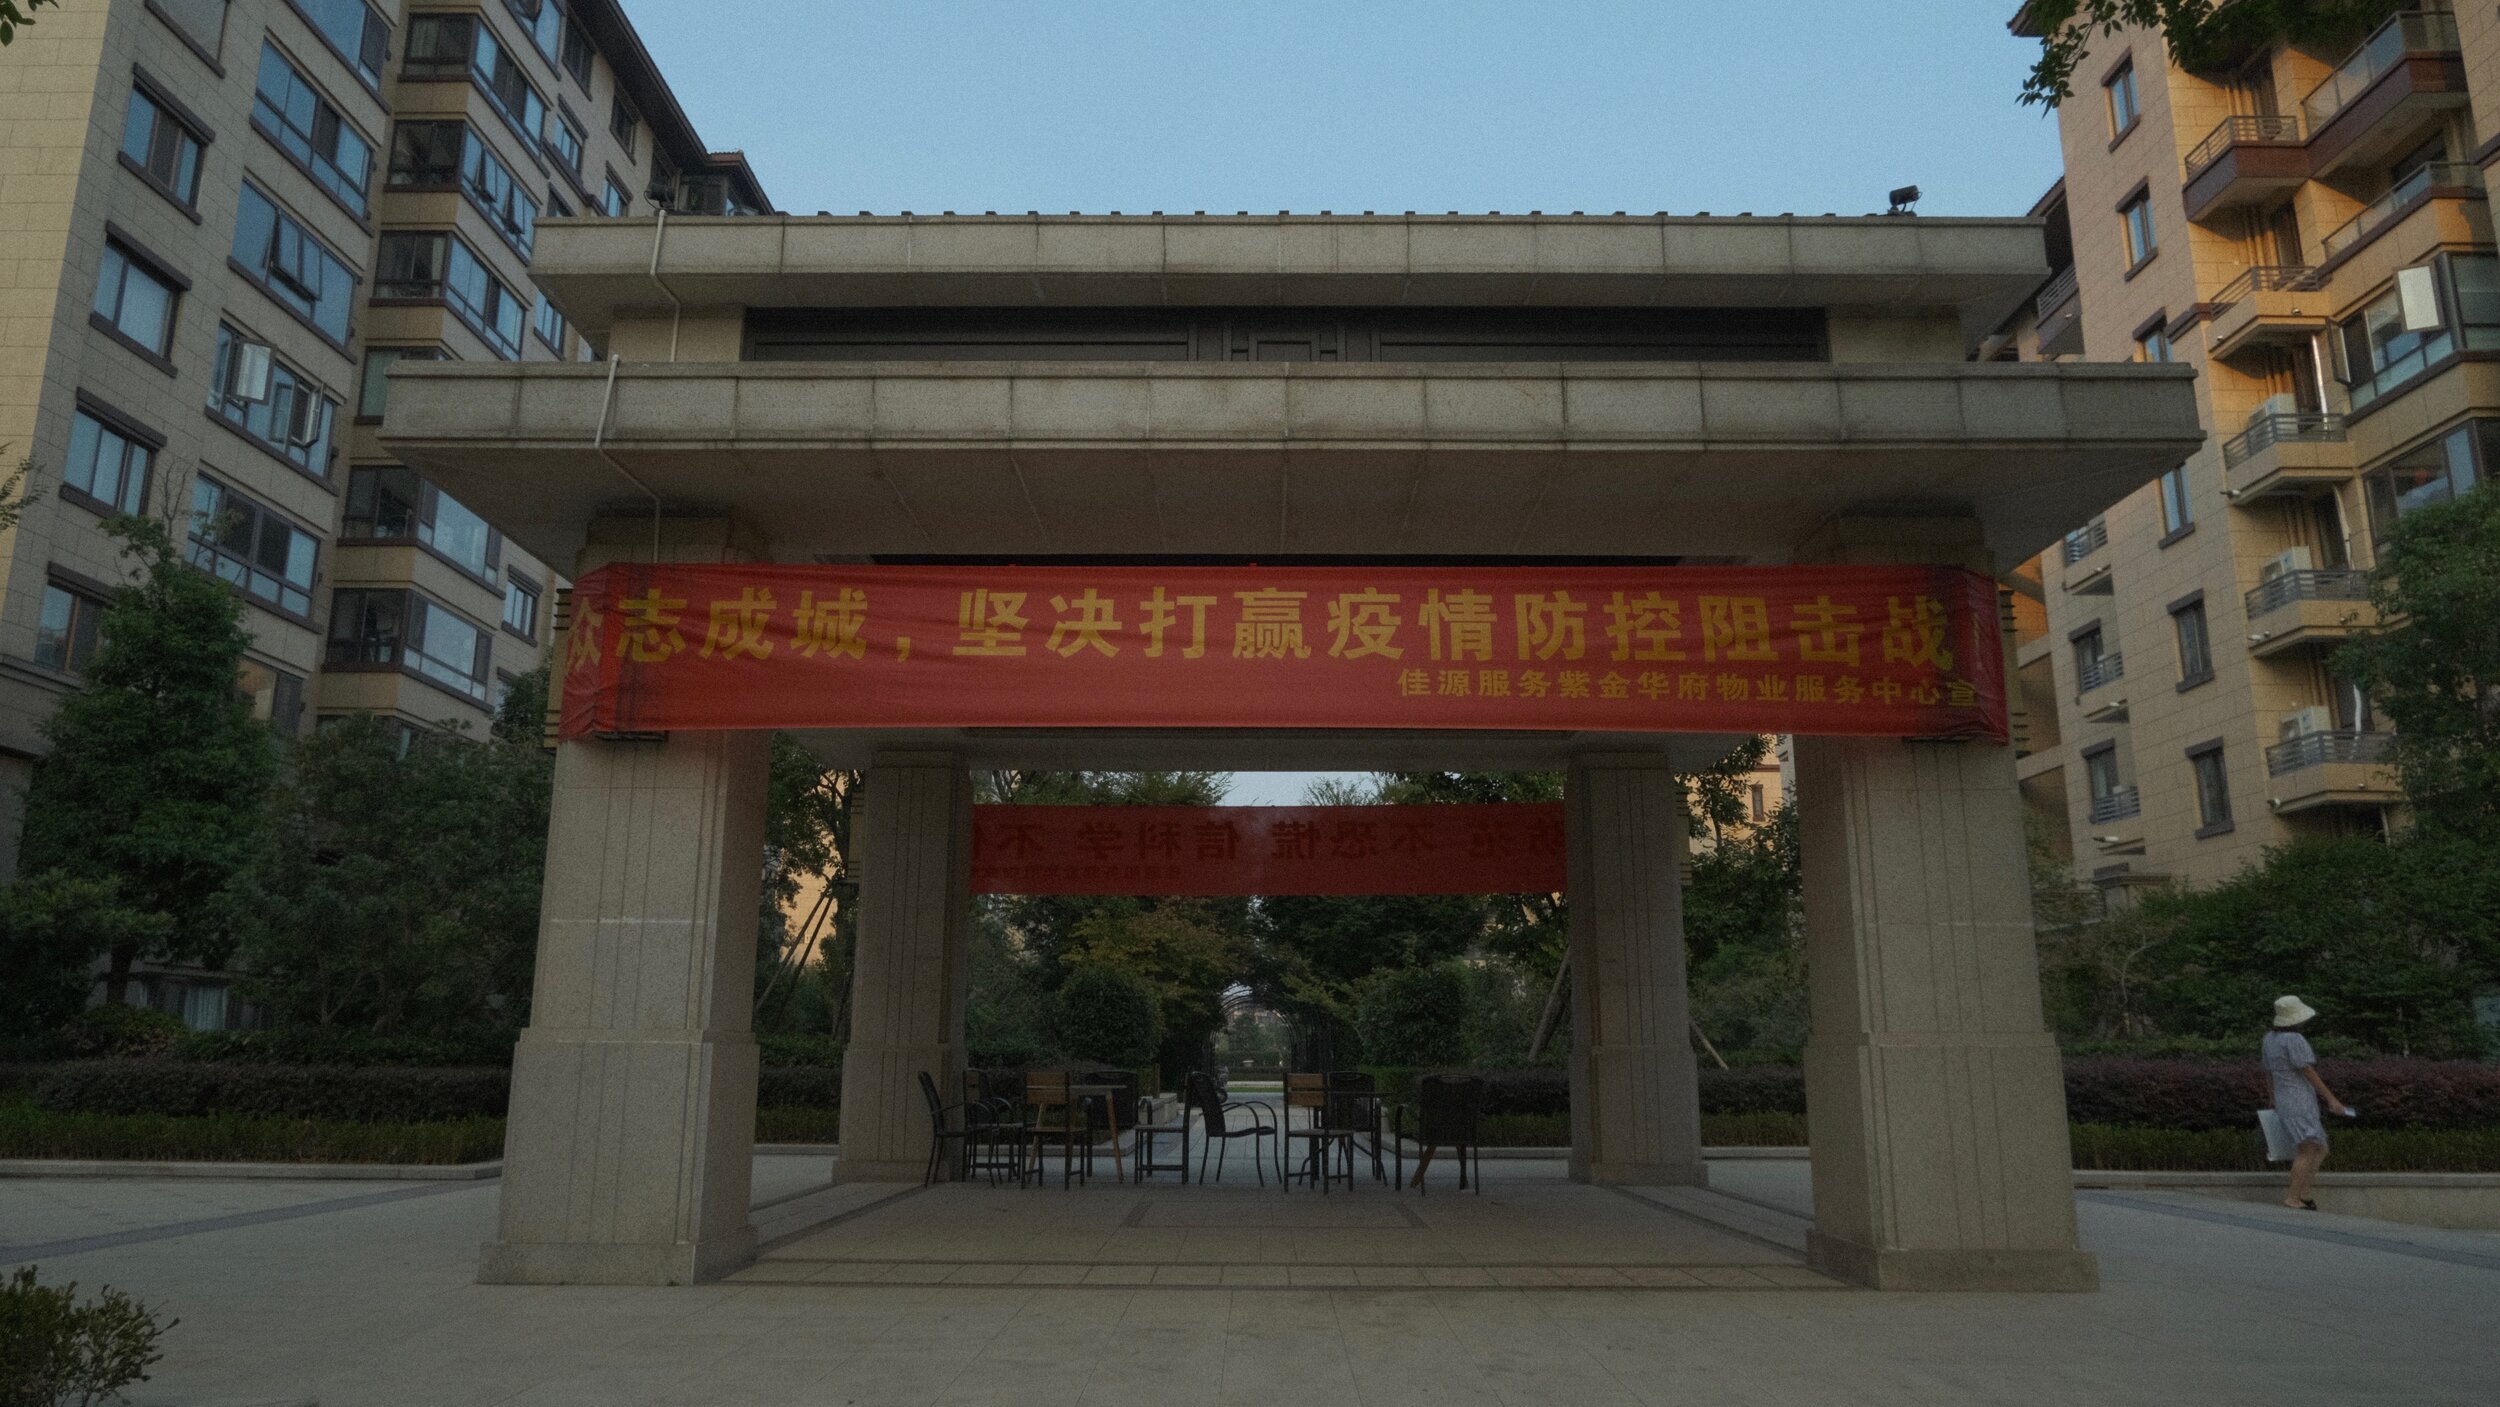  We have a few covered areas in our complex where our neighbors can gather to exercise or play games. There’s usually a big banner put up with some kind of message or slogan, this particular one says, “Be united and win the battle against the coronav